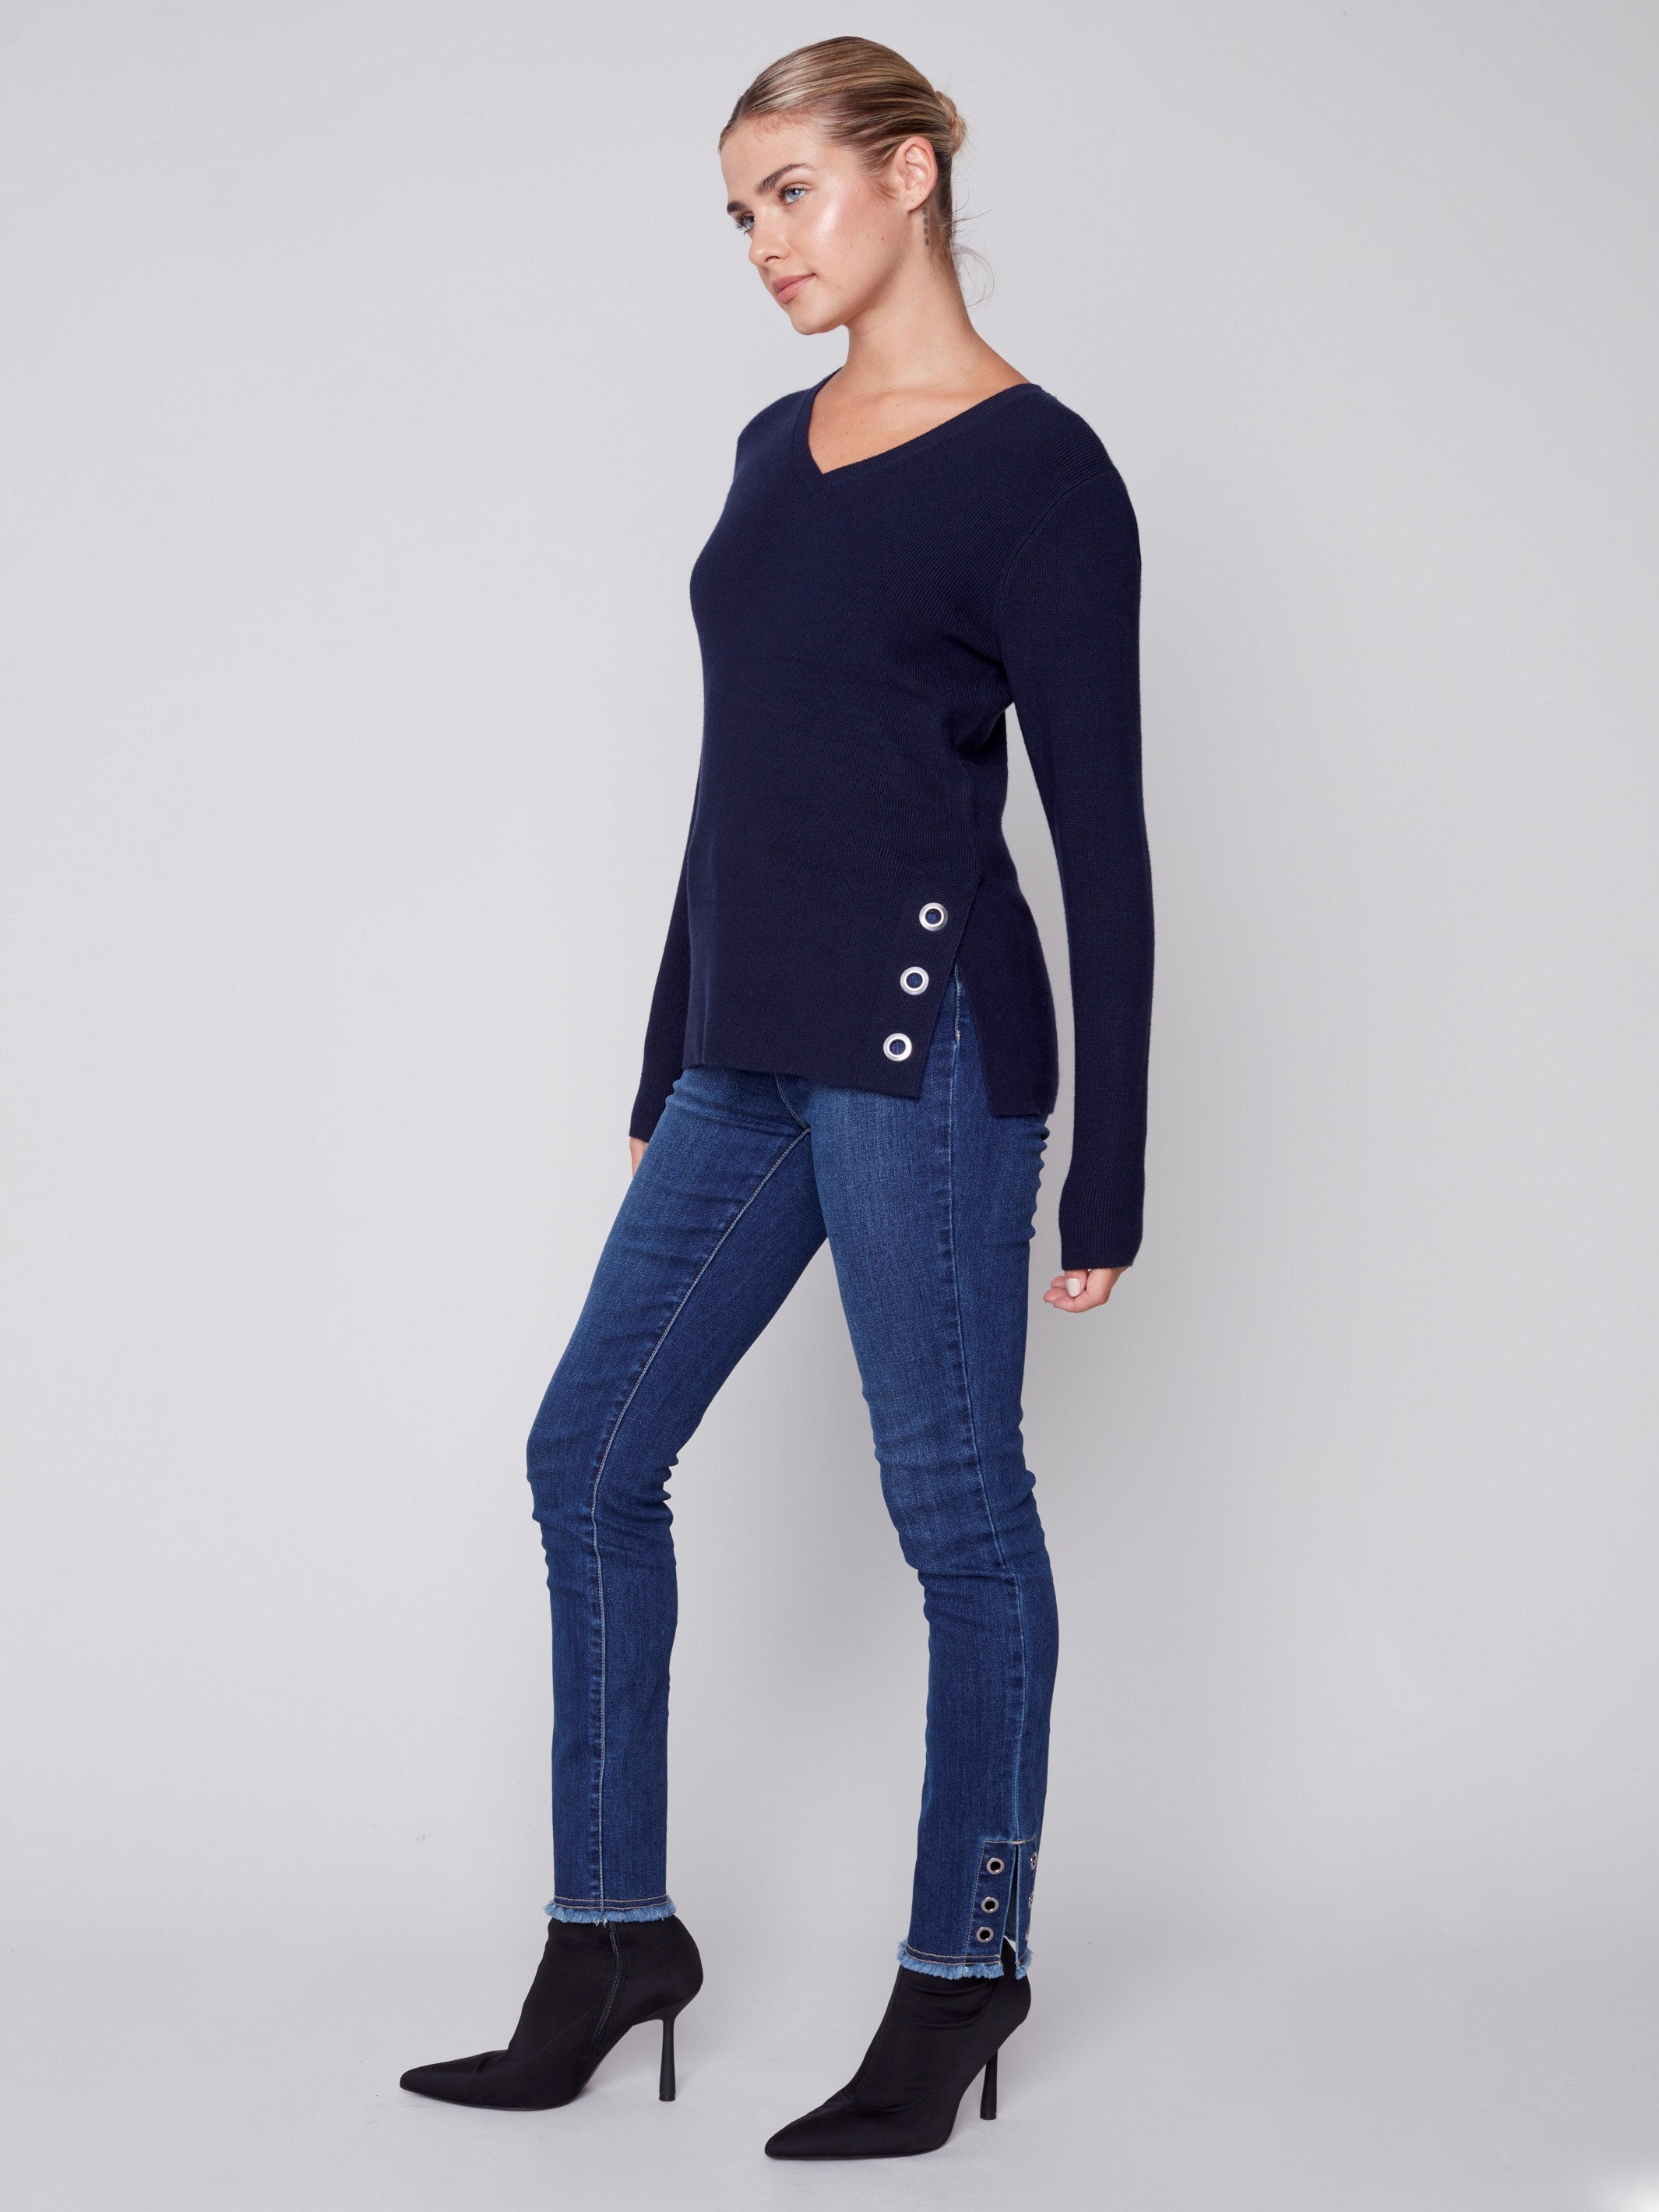 V-Neck Sweater with Grommet Detail - Navy